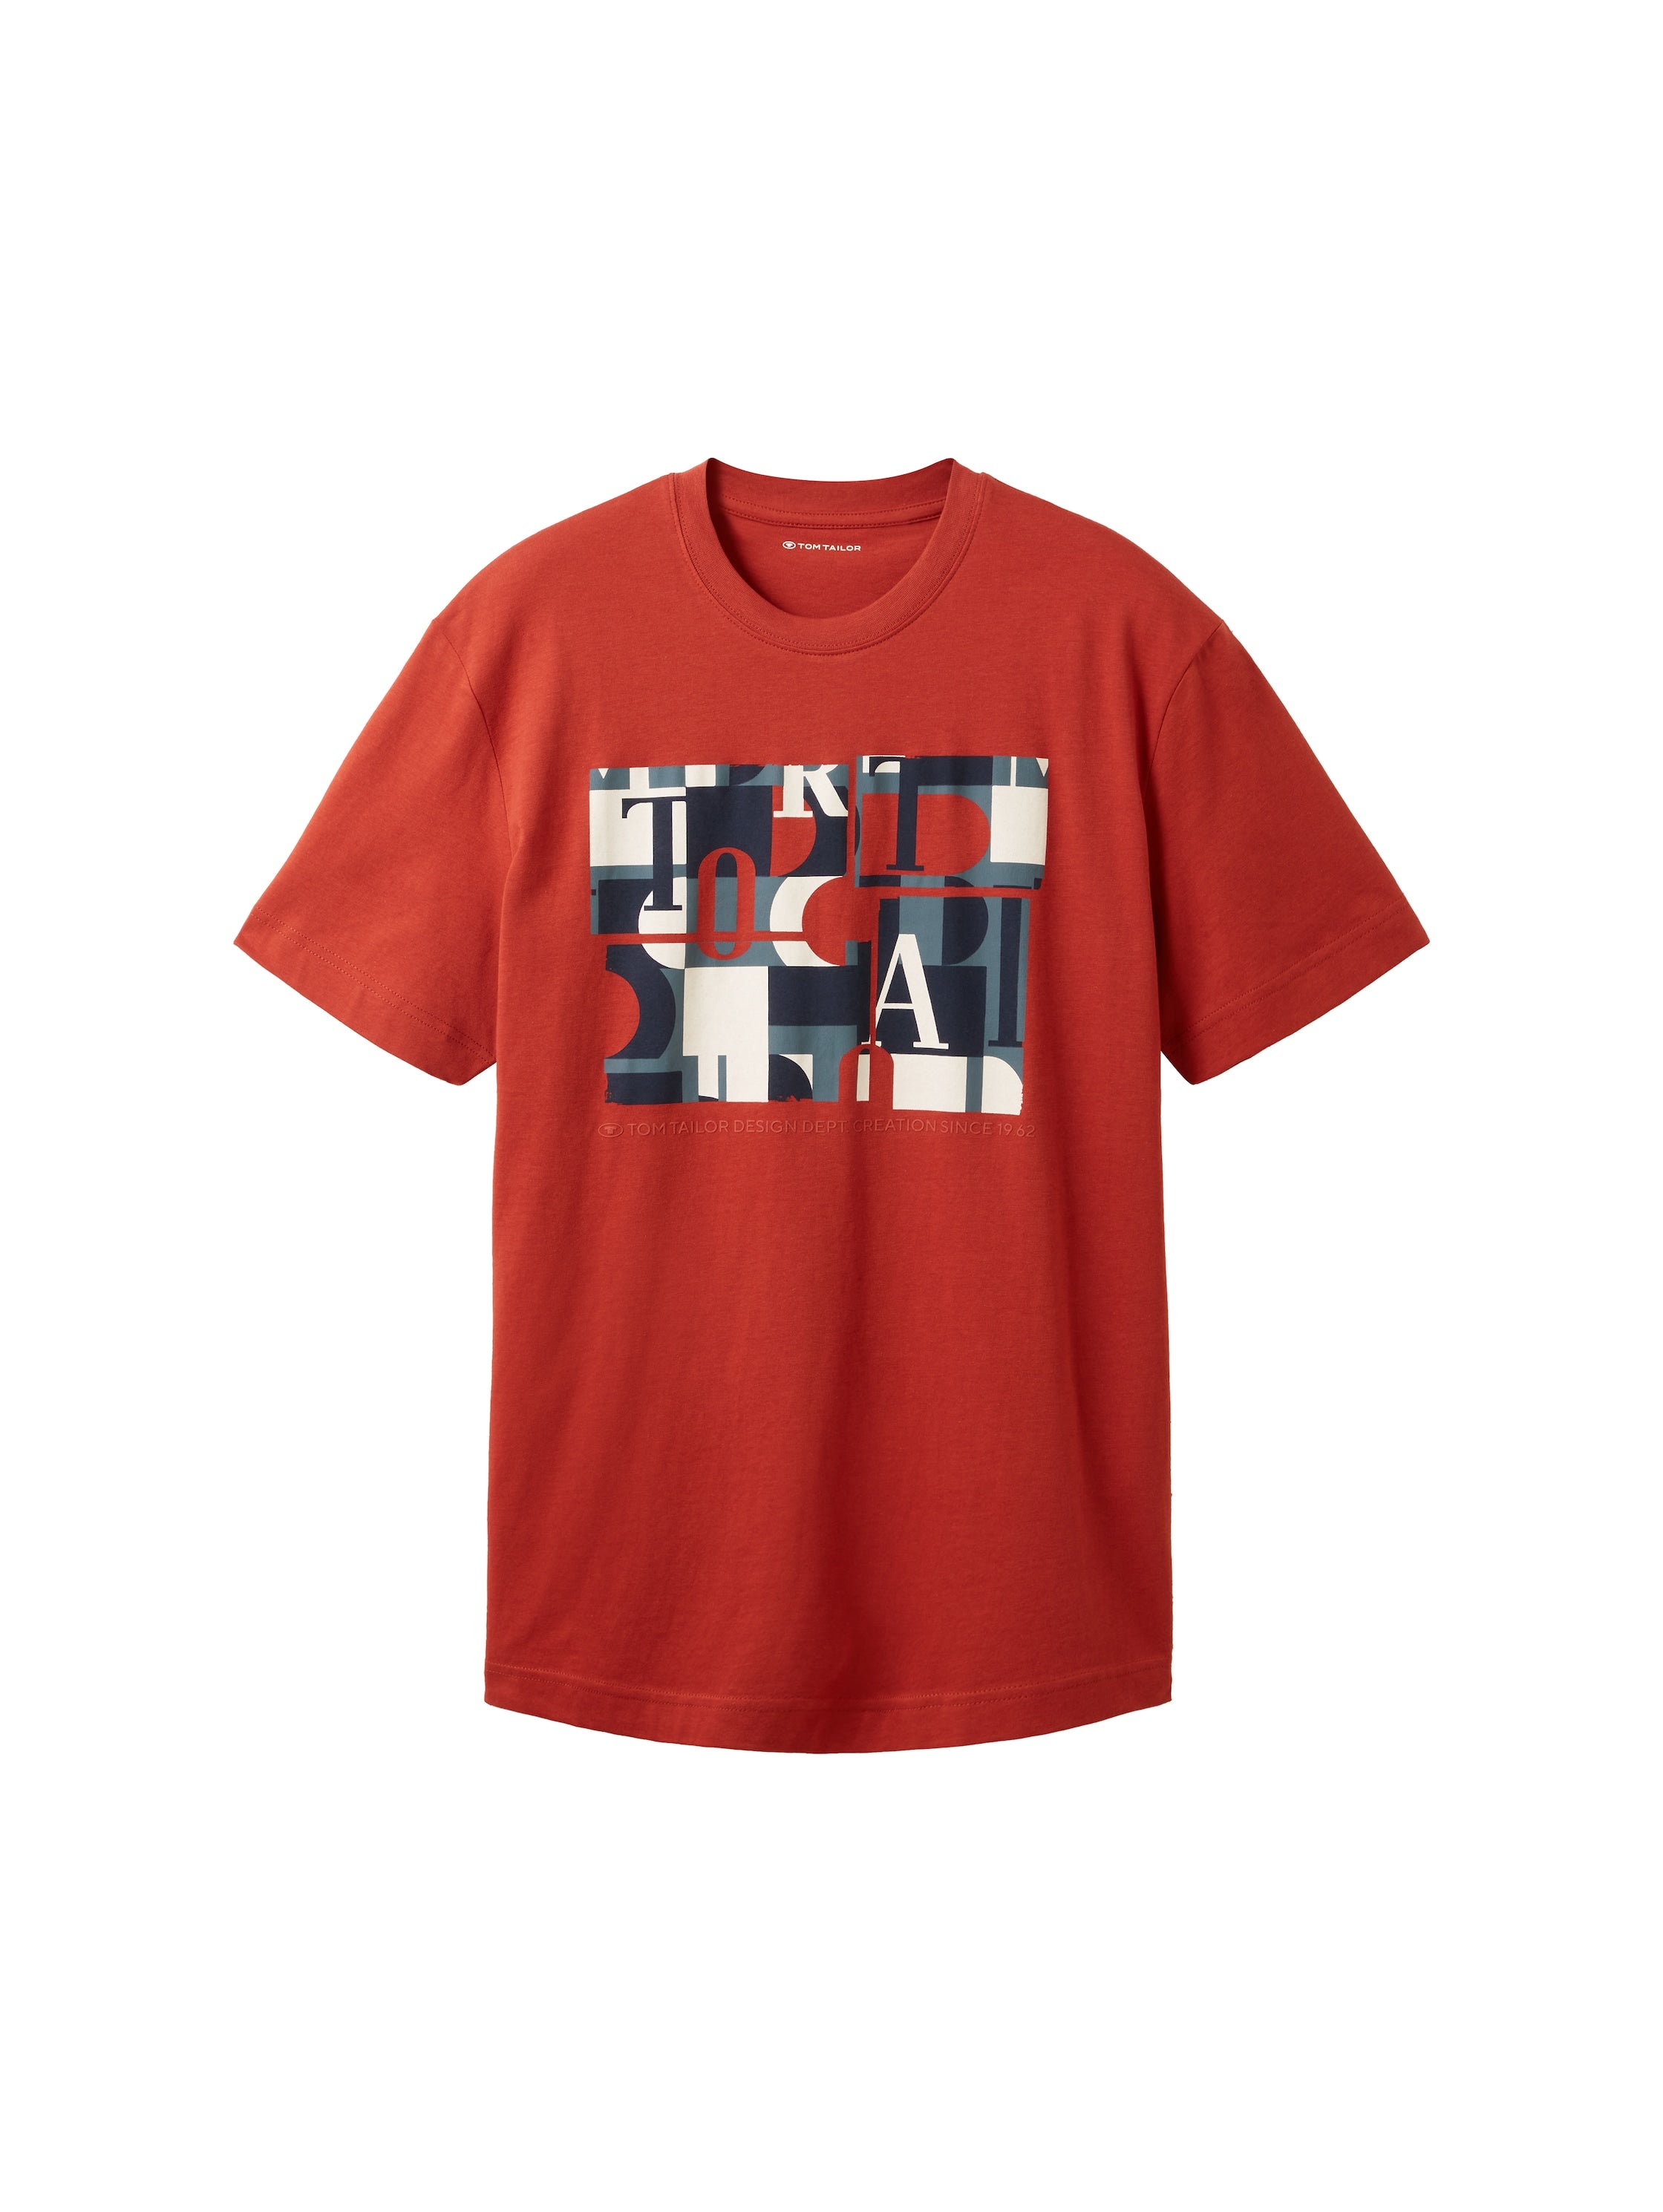 Tom Tailor Orange T-Shirt with a Print